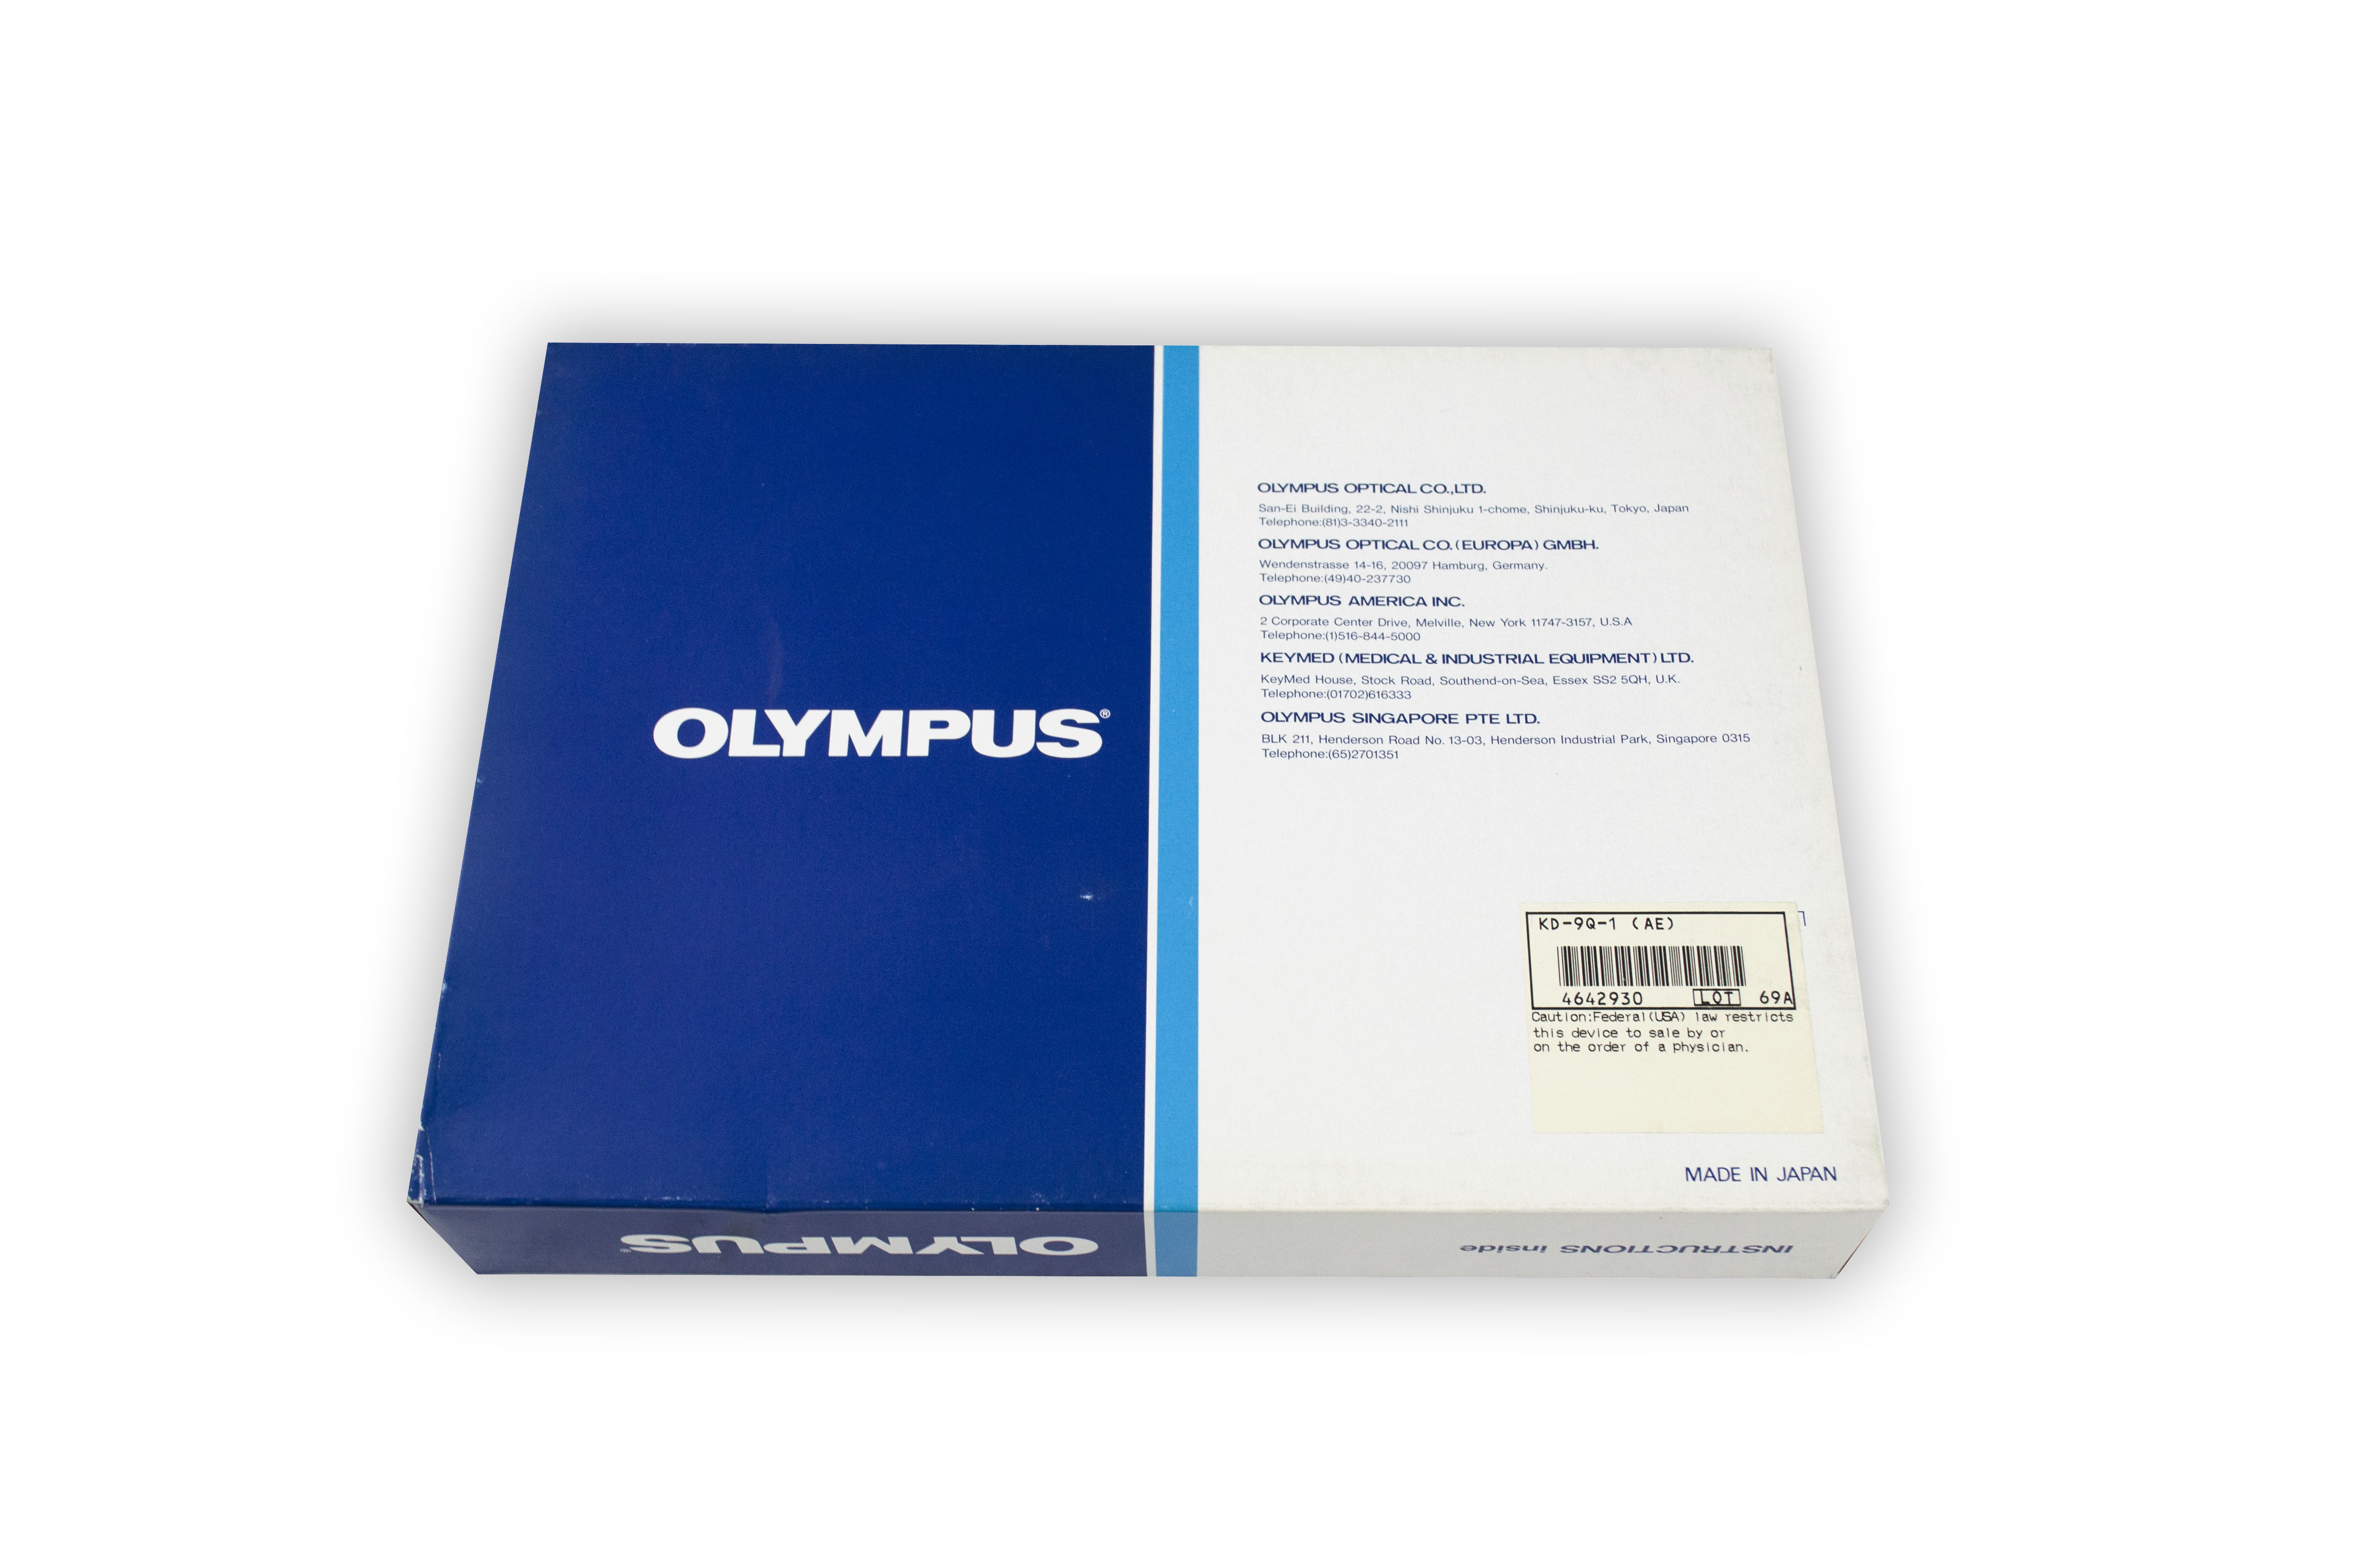 Olympus Reusable Sphincterotome - KD-9Q-1 (Set of 2 Knives, 1 Handle, 1 A Cord)